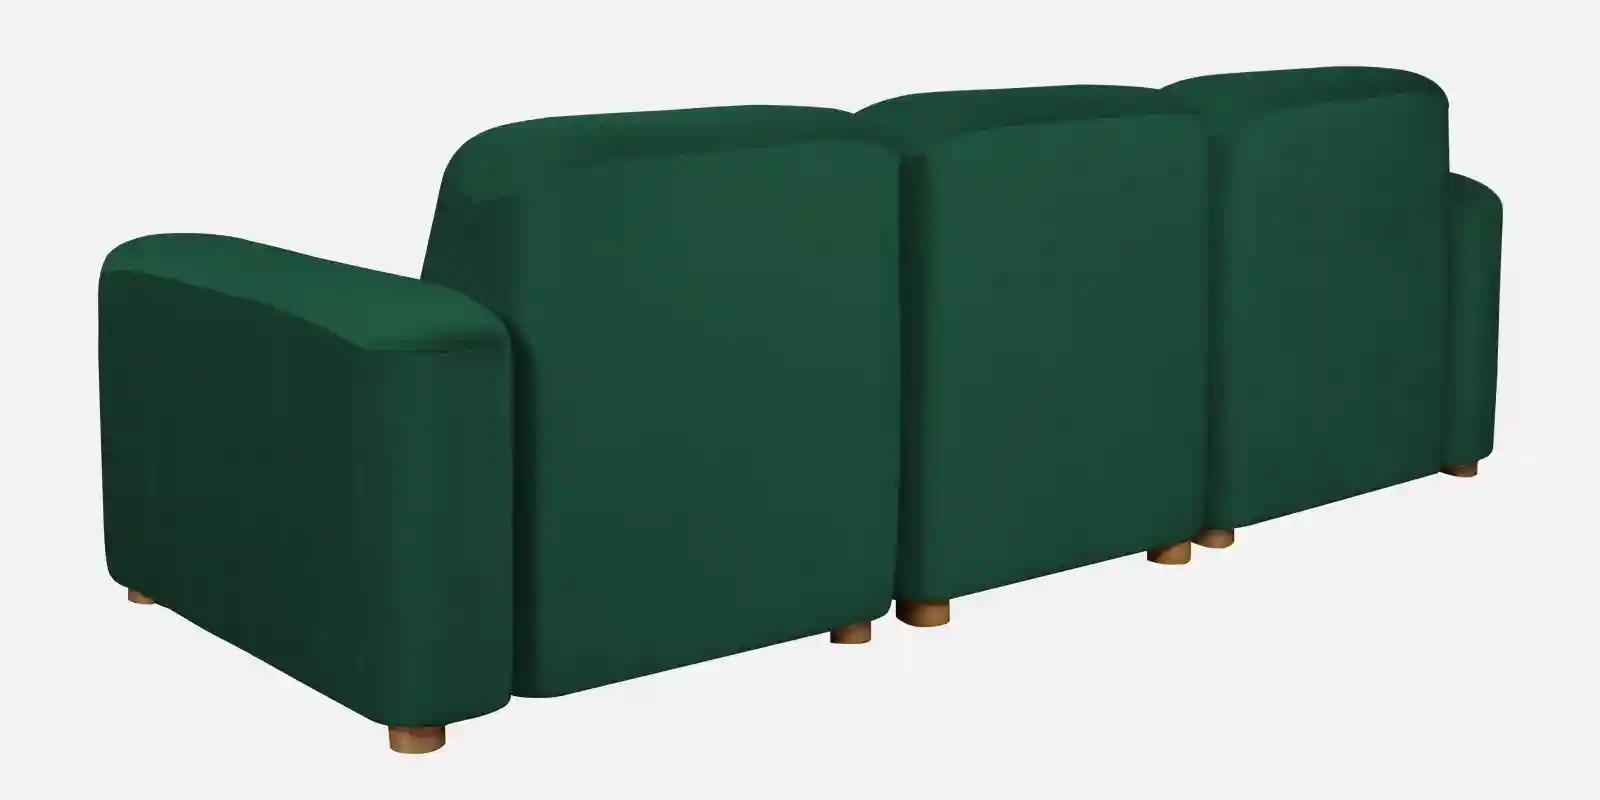 Pine Wood Polyester Fabric Teal Green 3-Seater Sofa